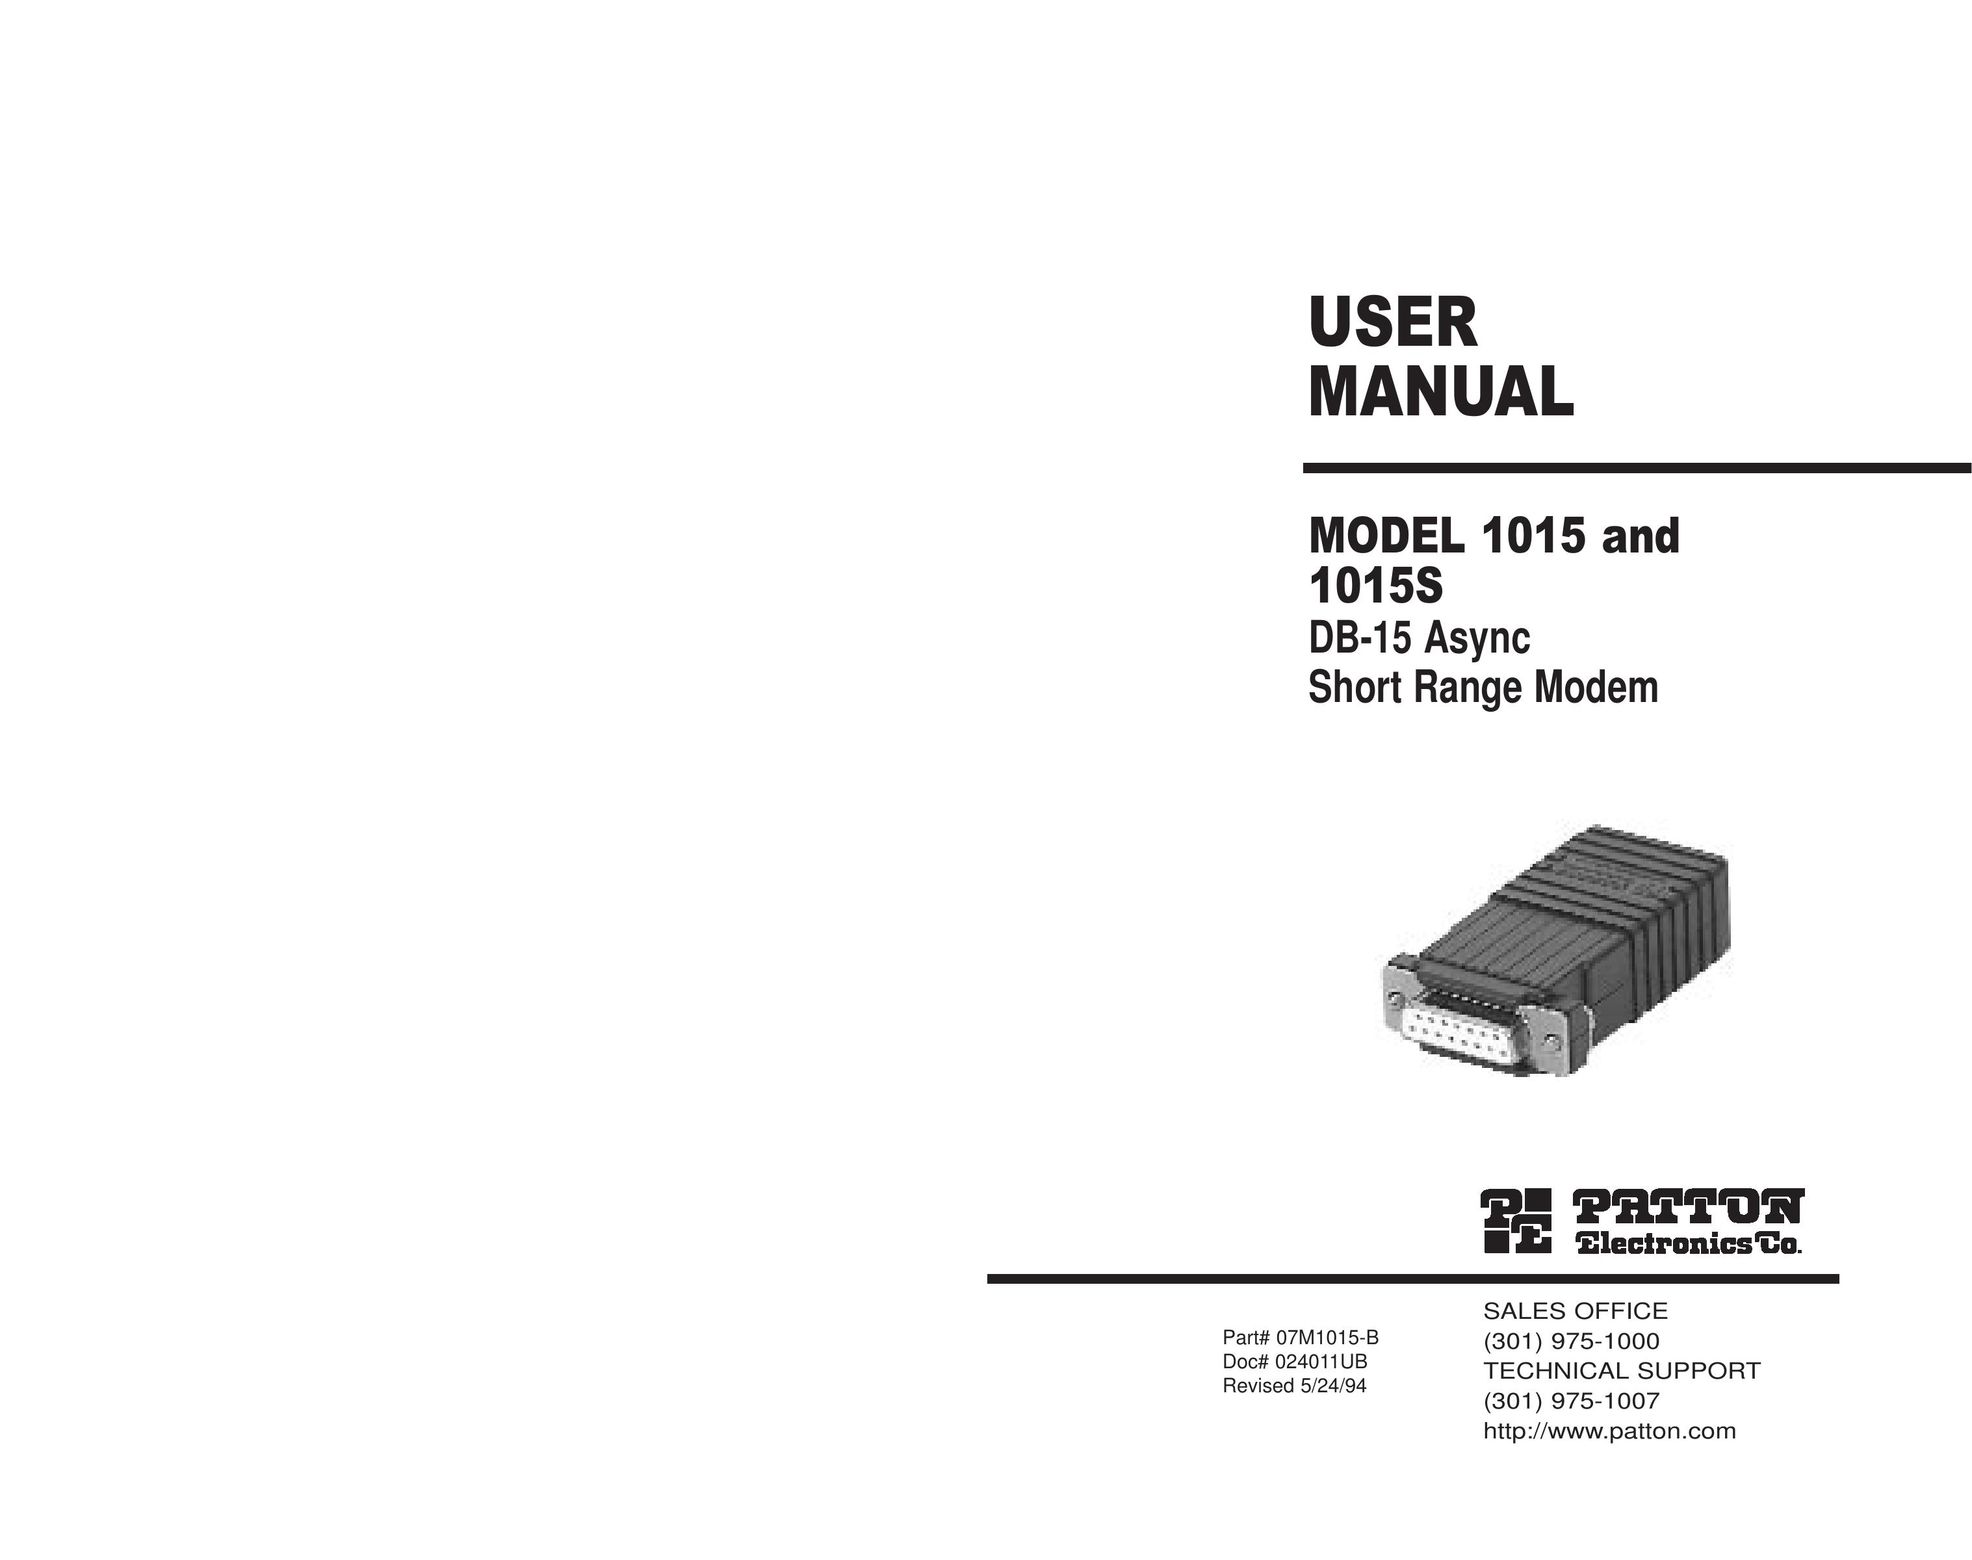 Patton electronic 1015 Network Card User Manual